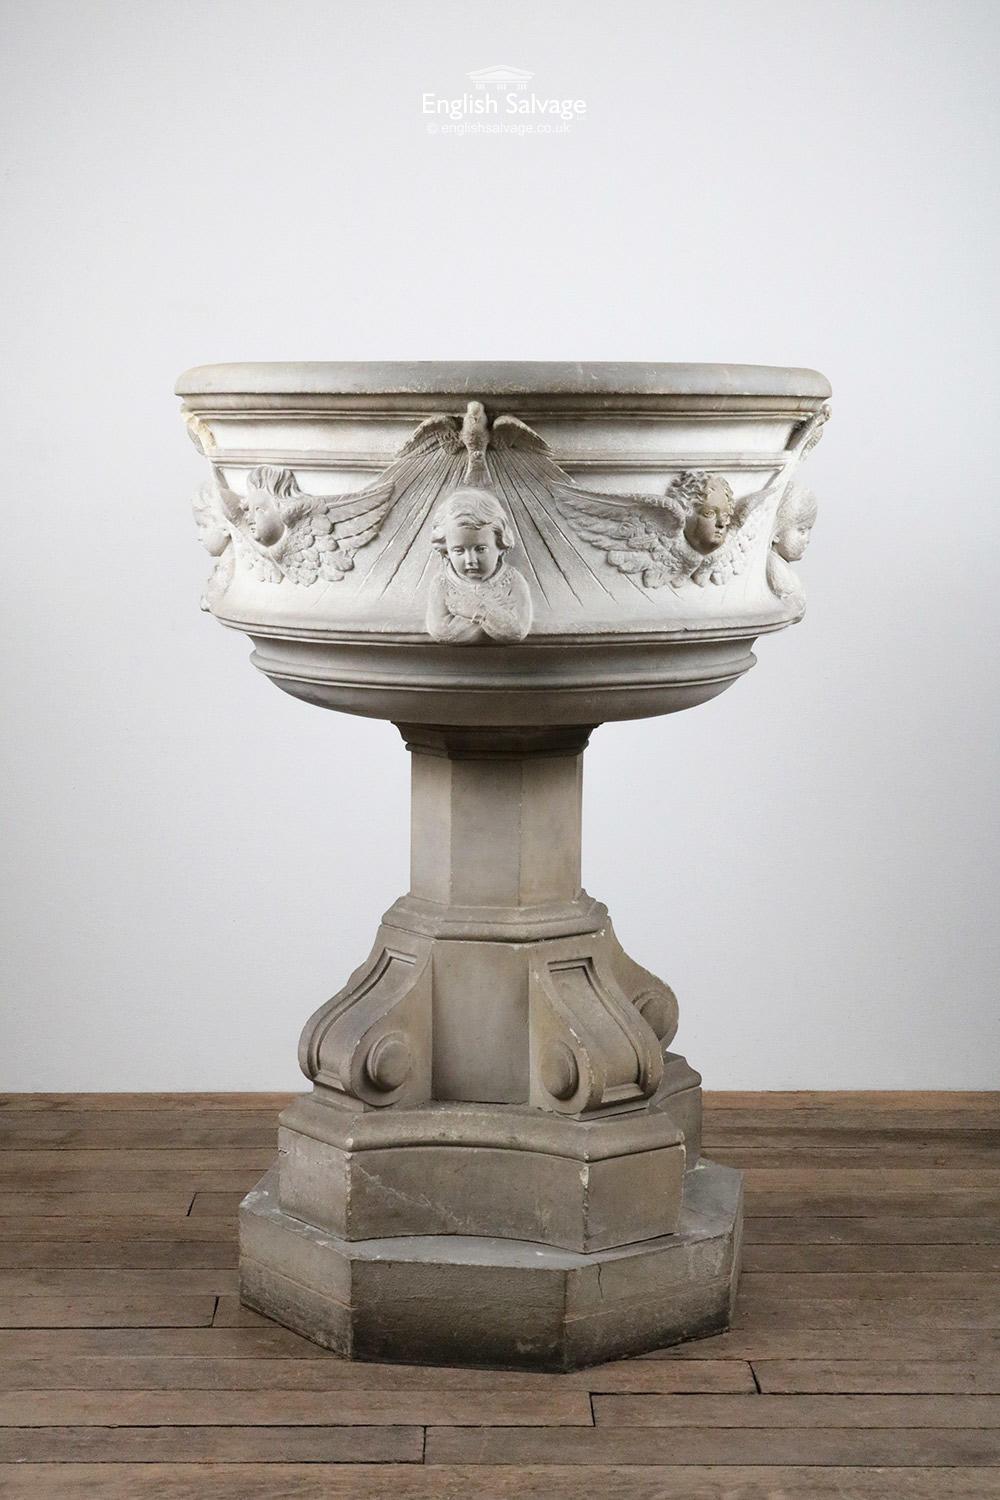 Impessive salvaged stone church font. Carved with the Biblical quote 